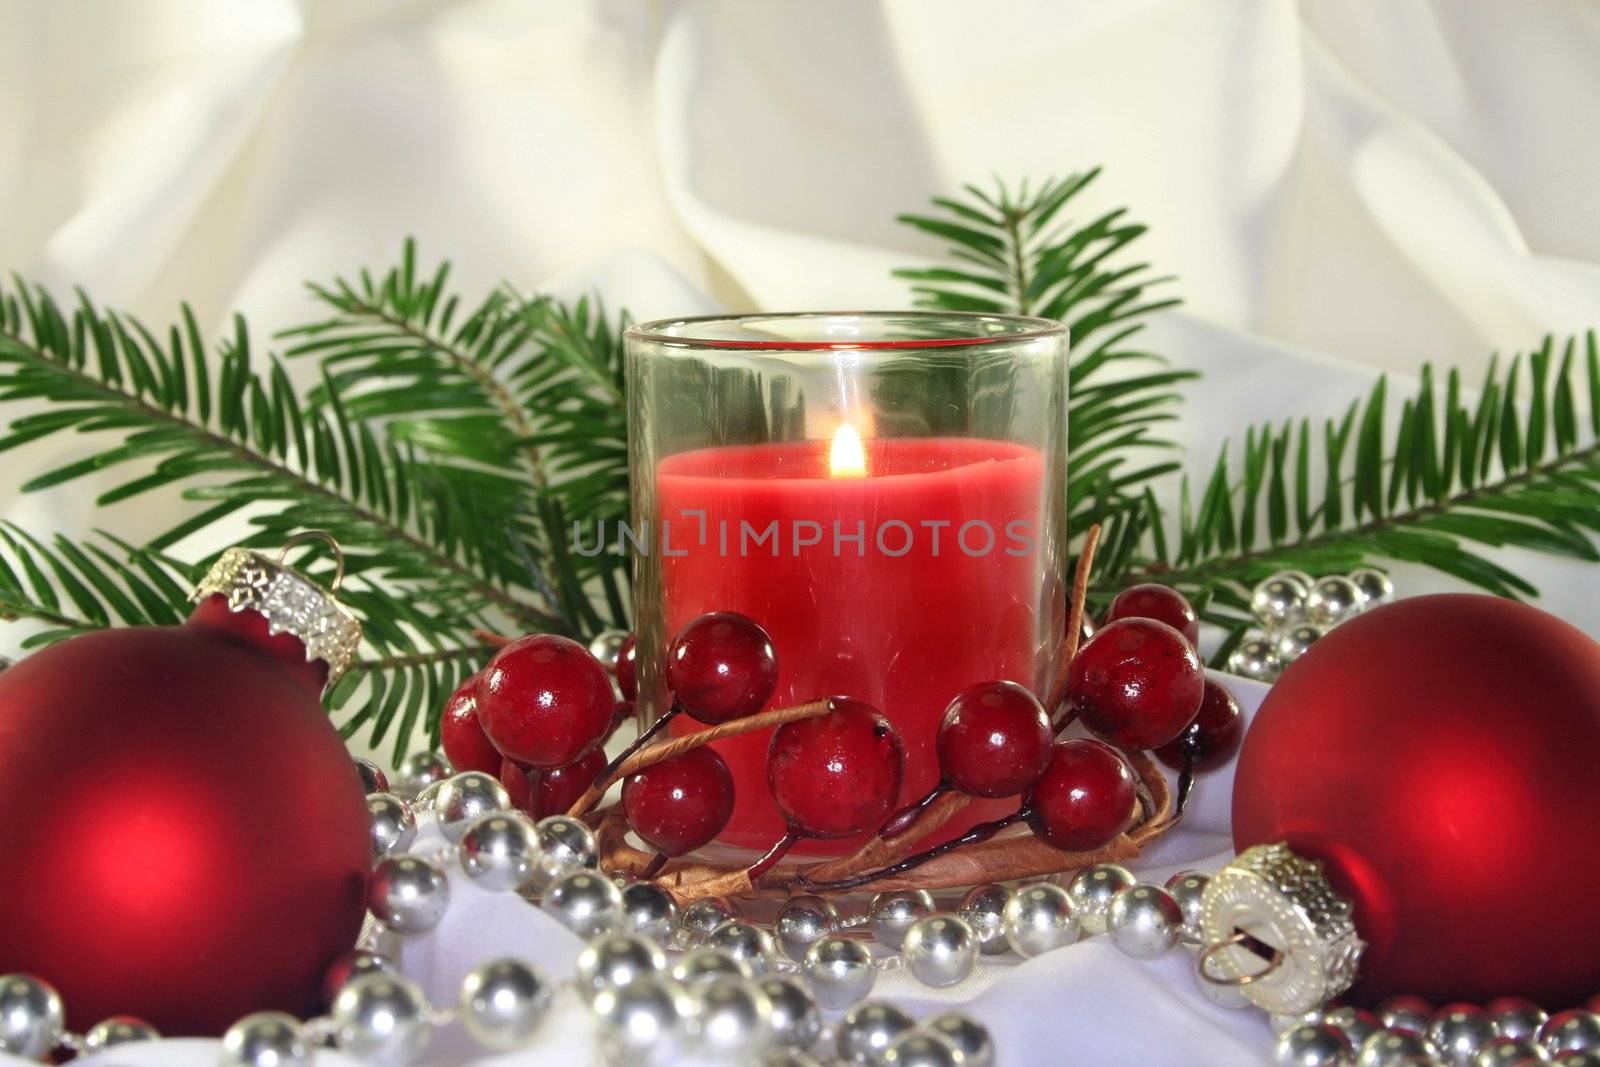 Christmas decoration by silencefoto